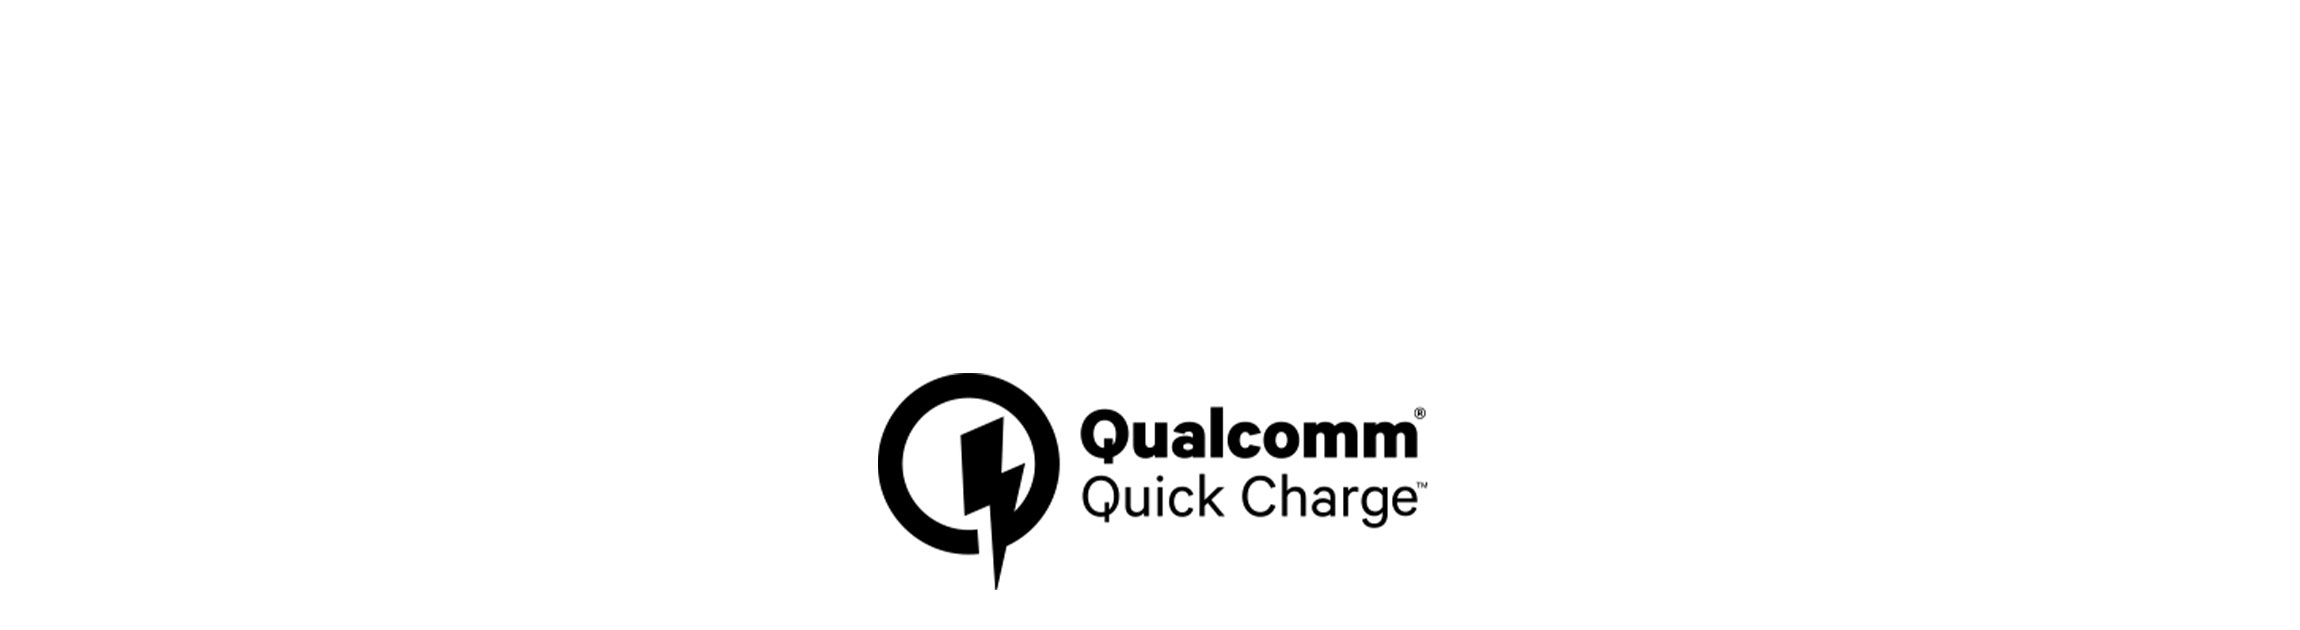 AT-QuickCharge-3.jpg